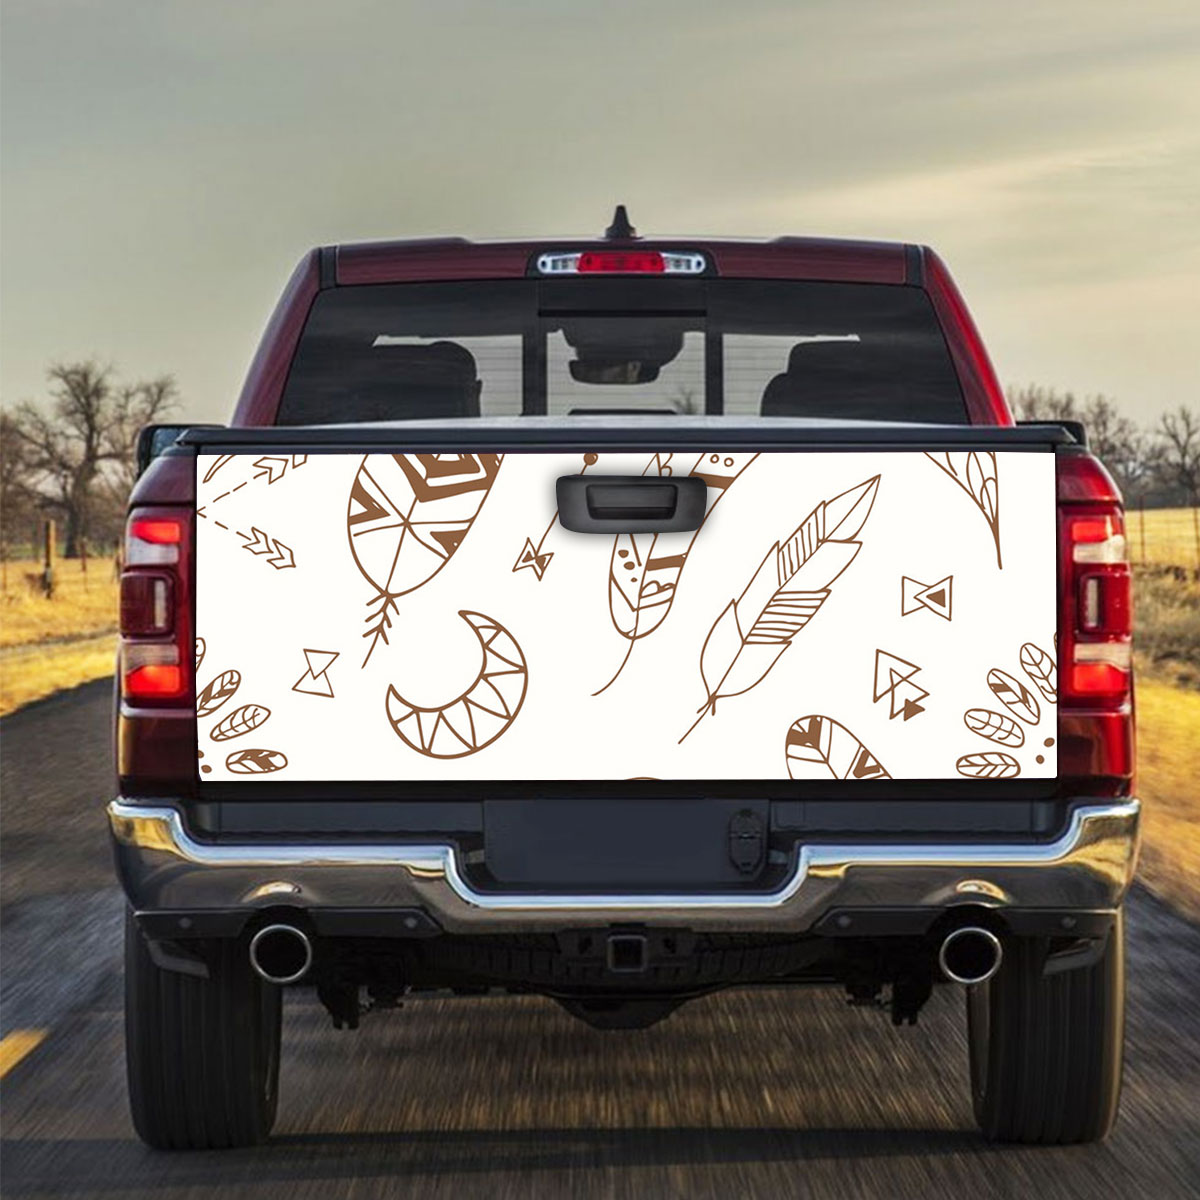 Boho Chic Style Truck Bed Decal